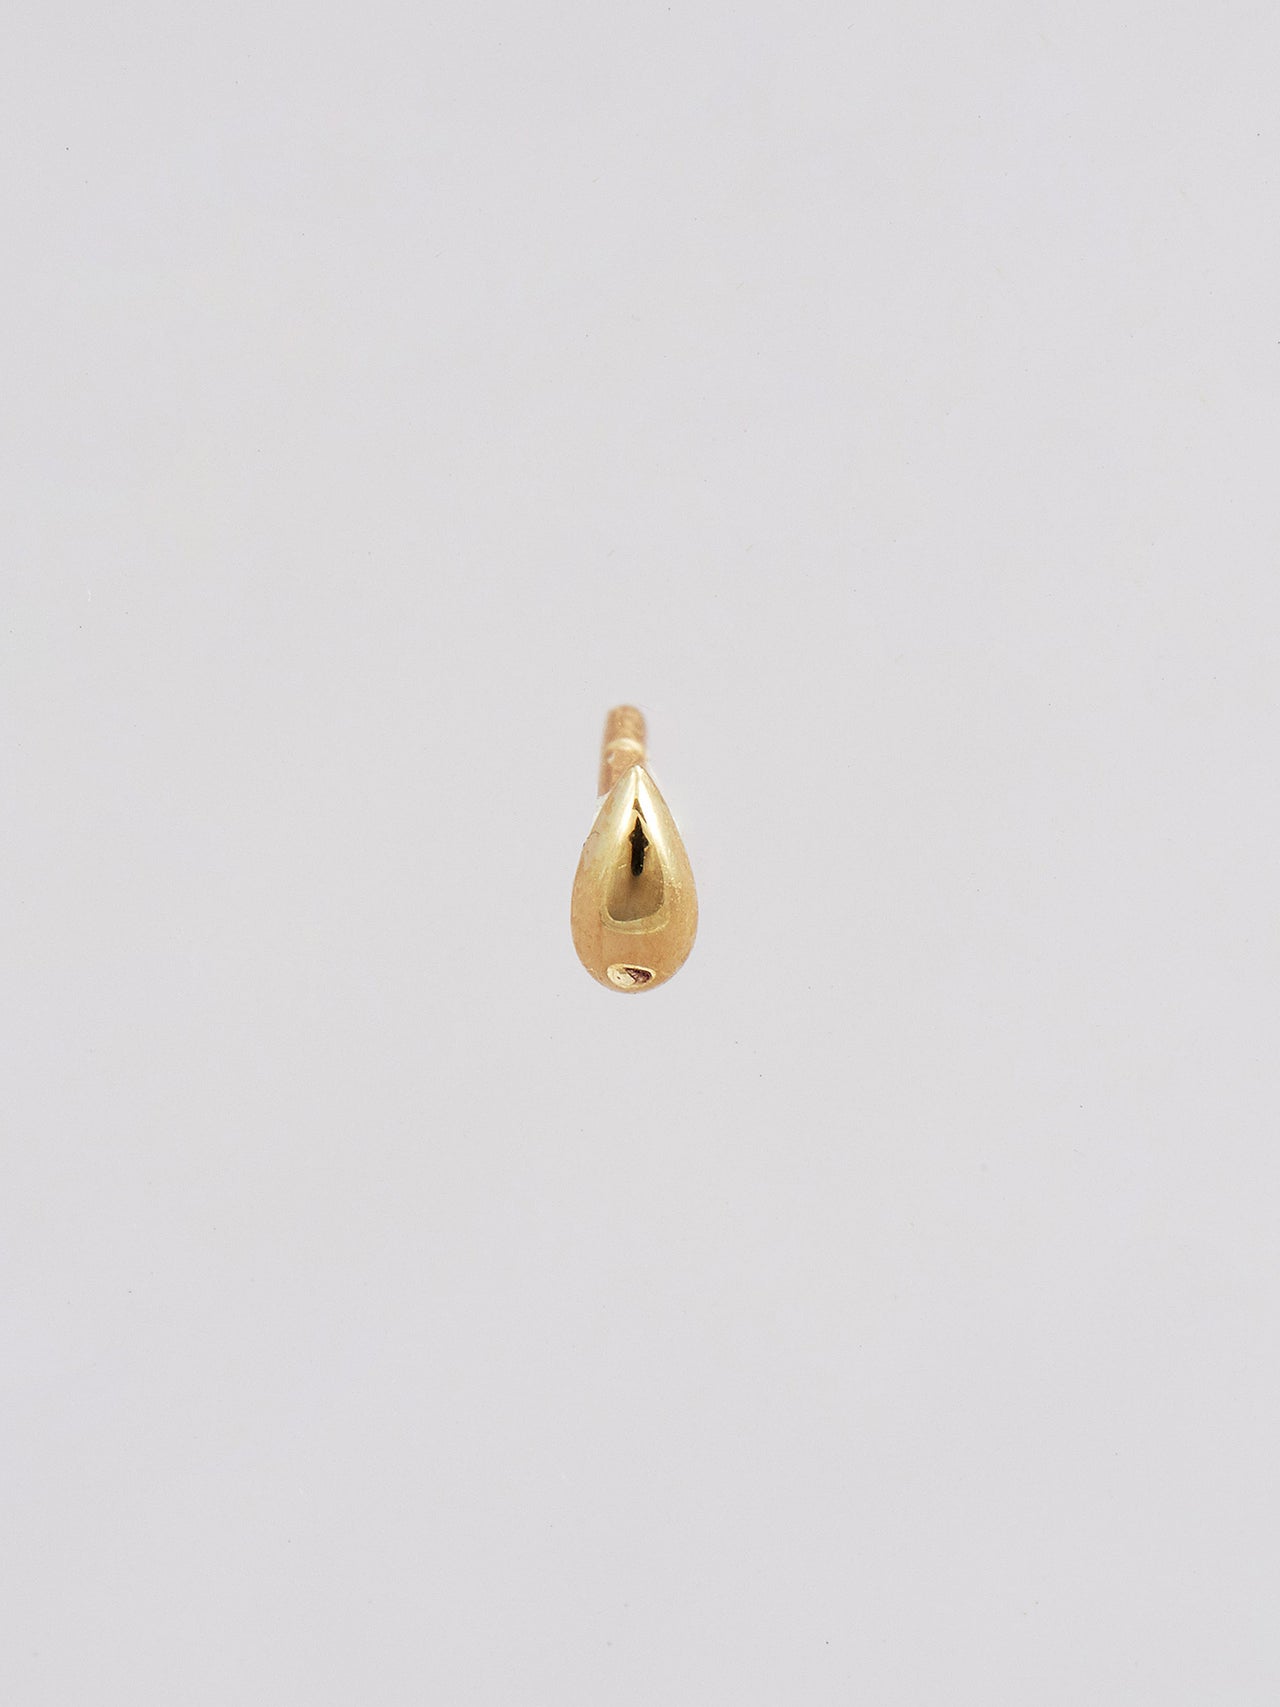 Front product shot of the Mini Teardrop Stud (14Kt Yellow Gold Droplet Stud Earring Diameter: 2X3.5mm) Background: Grey Backdrop